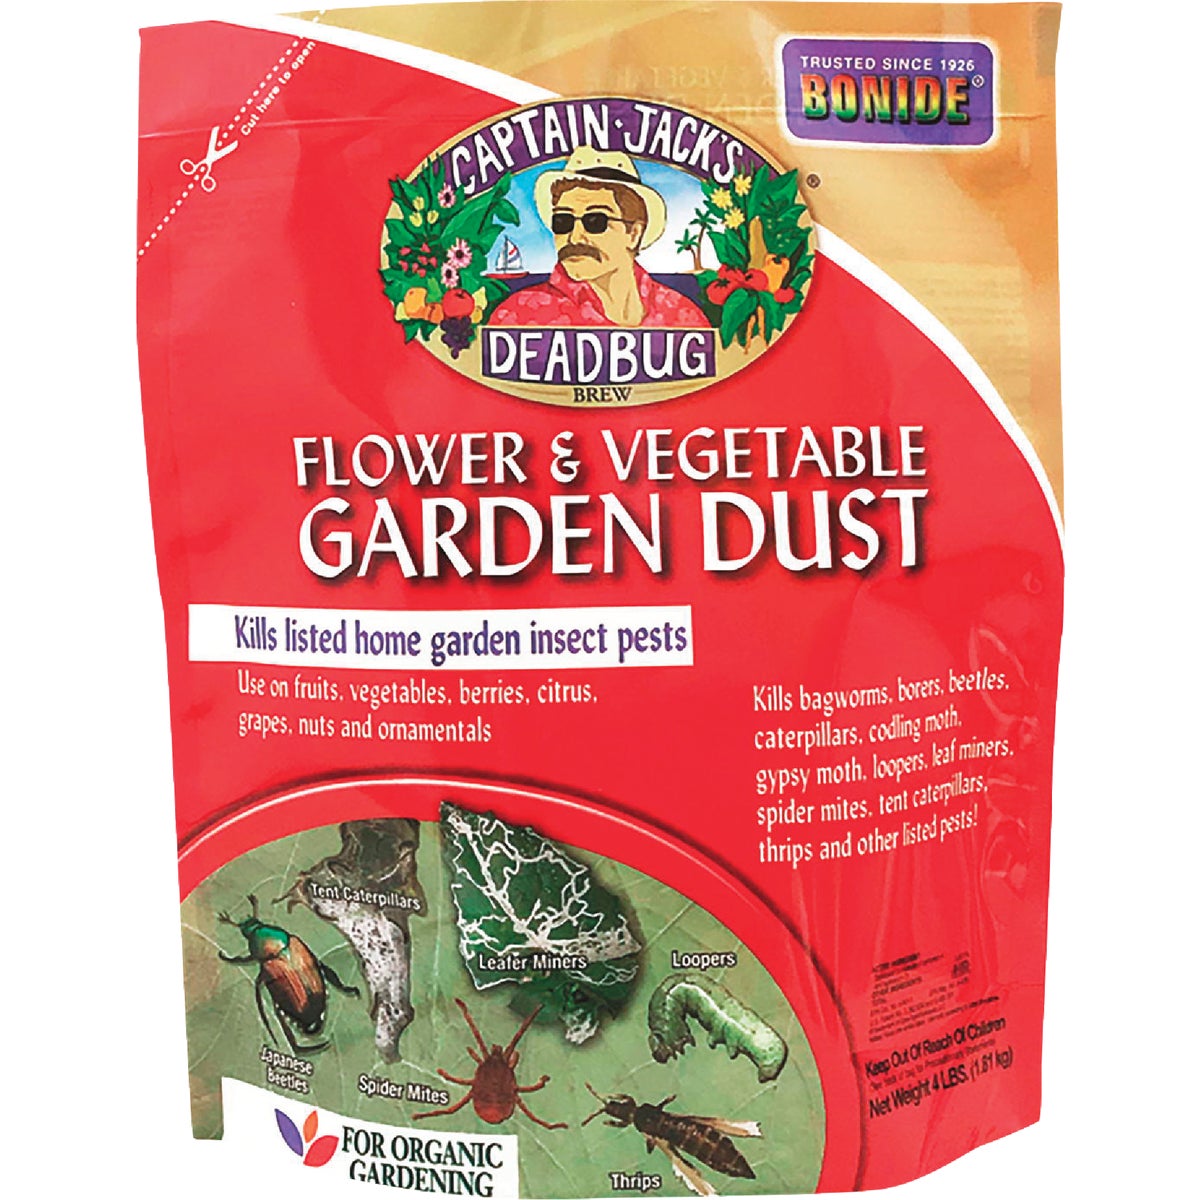 Item 702195, Protect your home garden from common garden insects and pests with Captain 